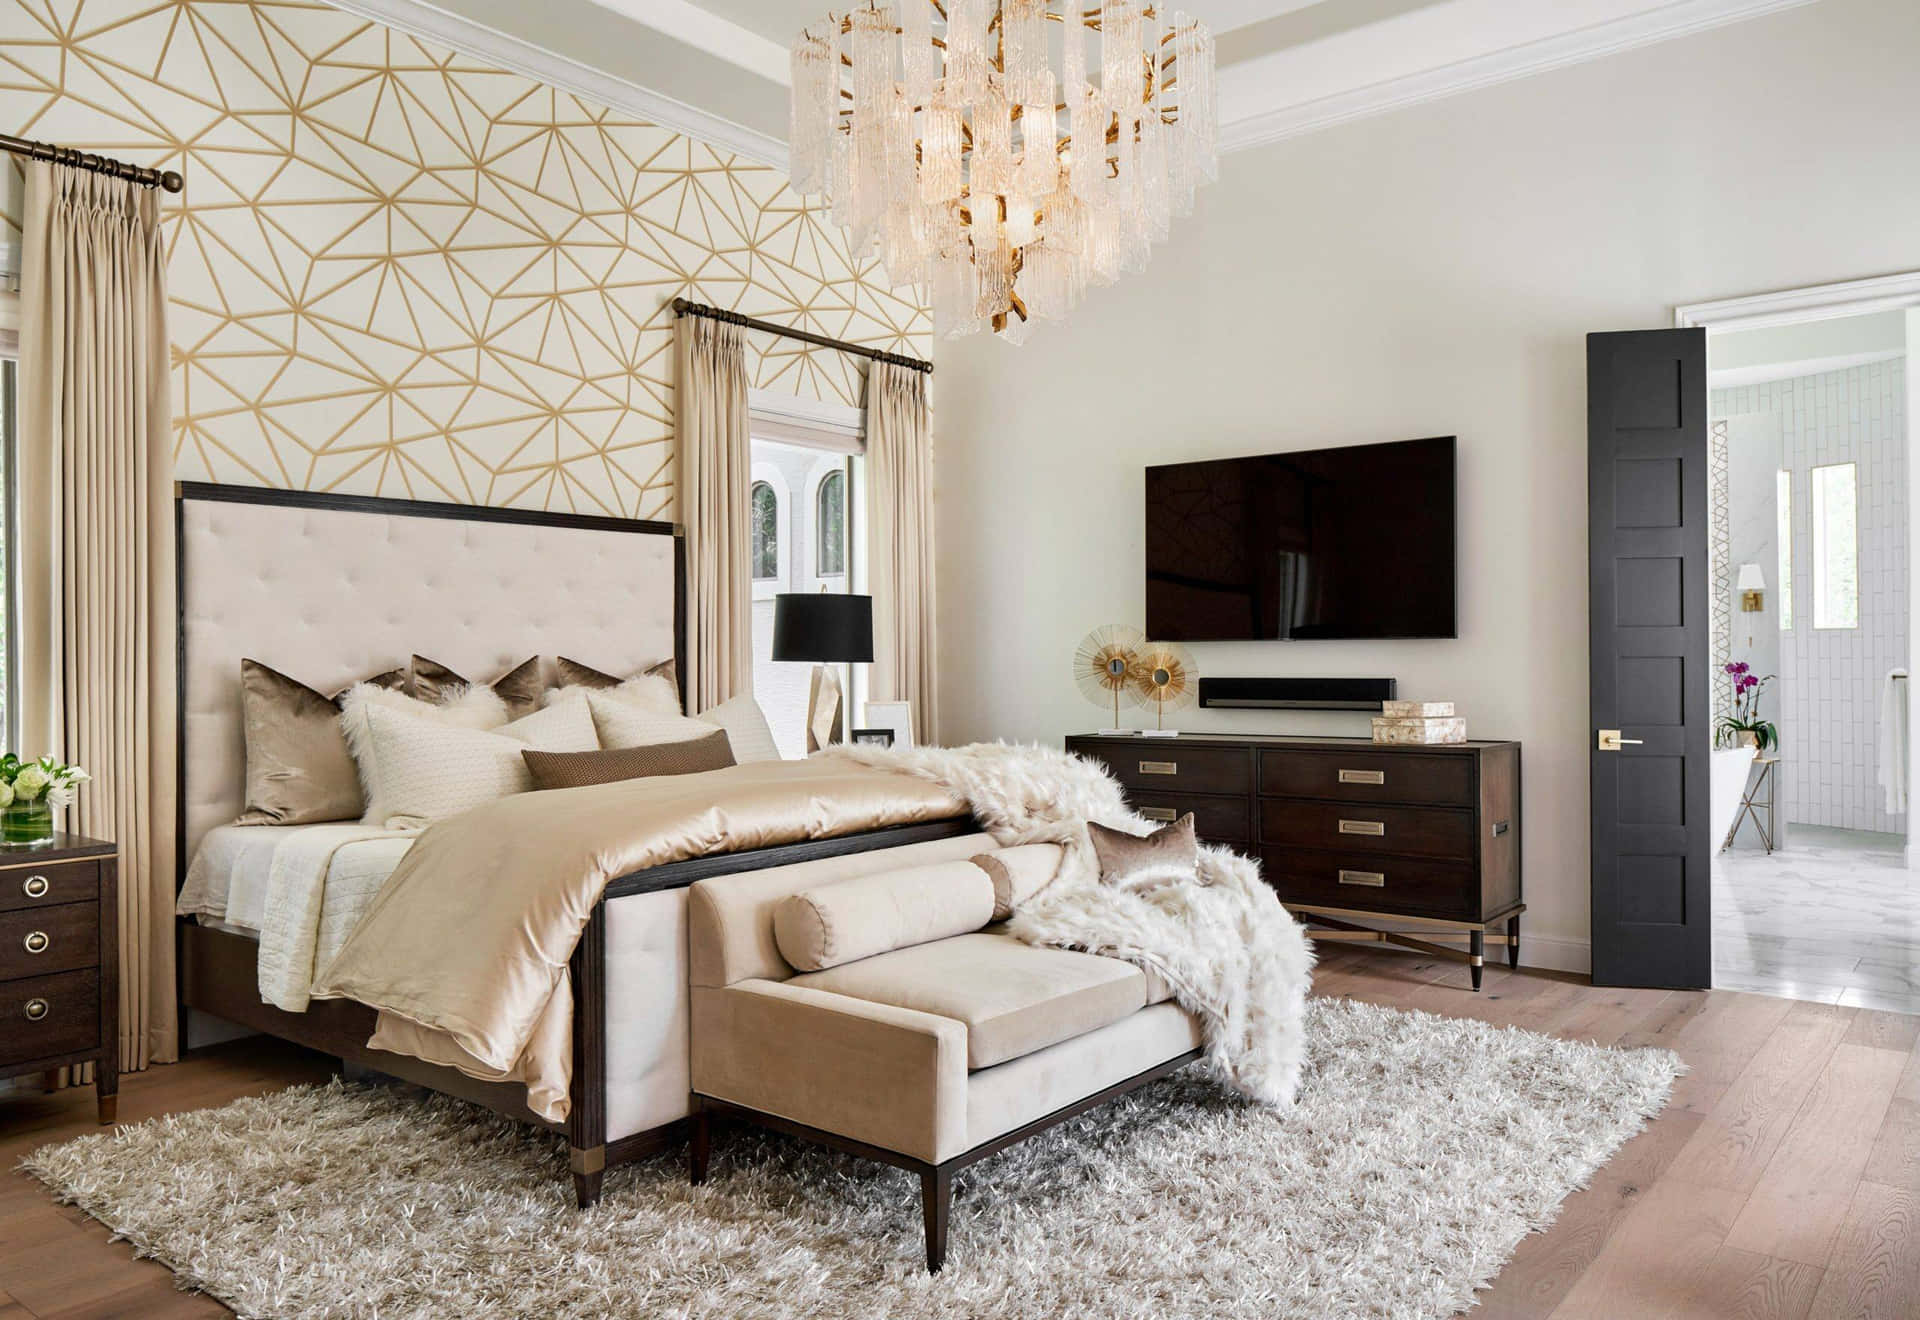 Luxurious Bed Grand Chandeliers Picture